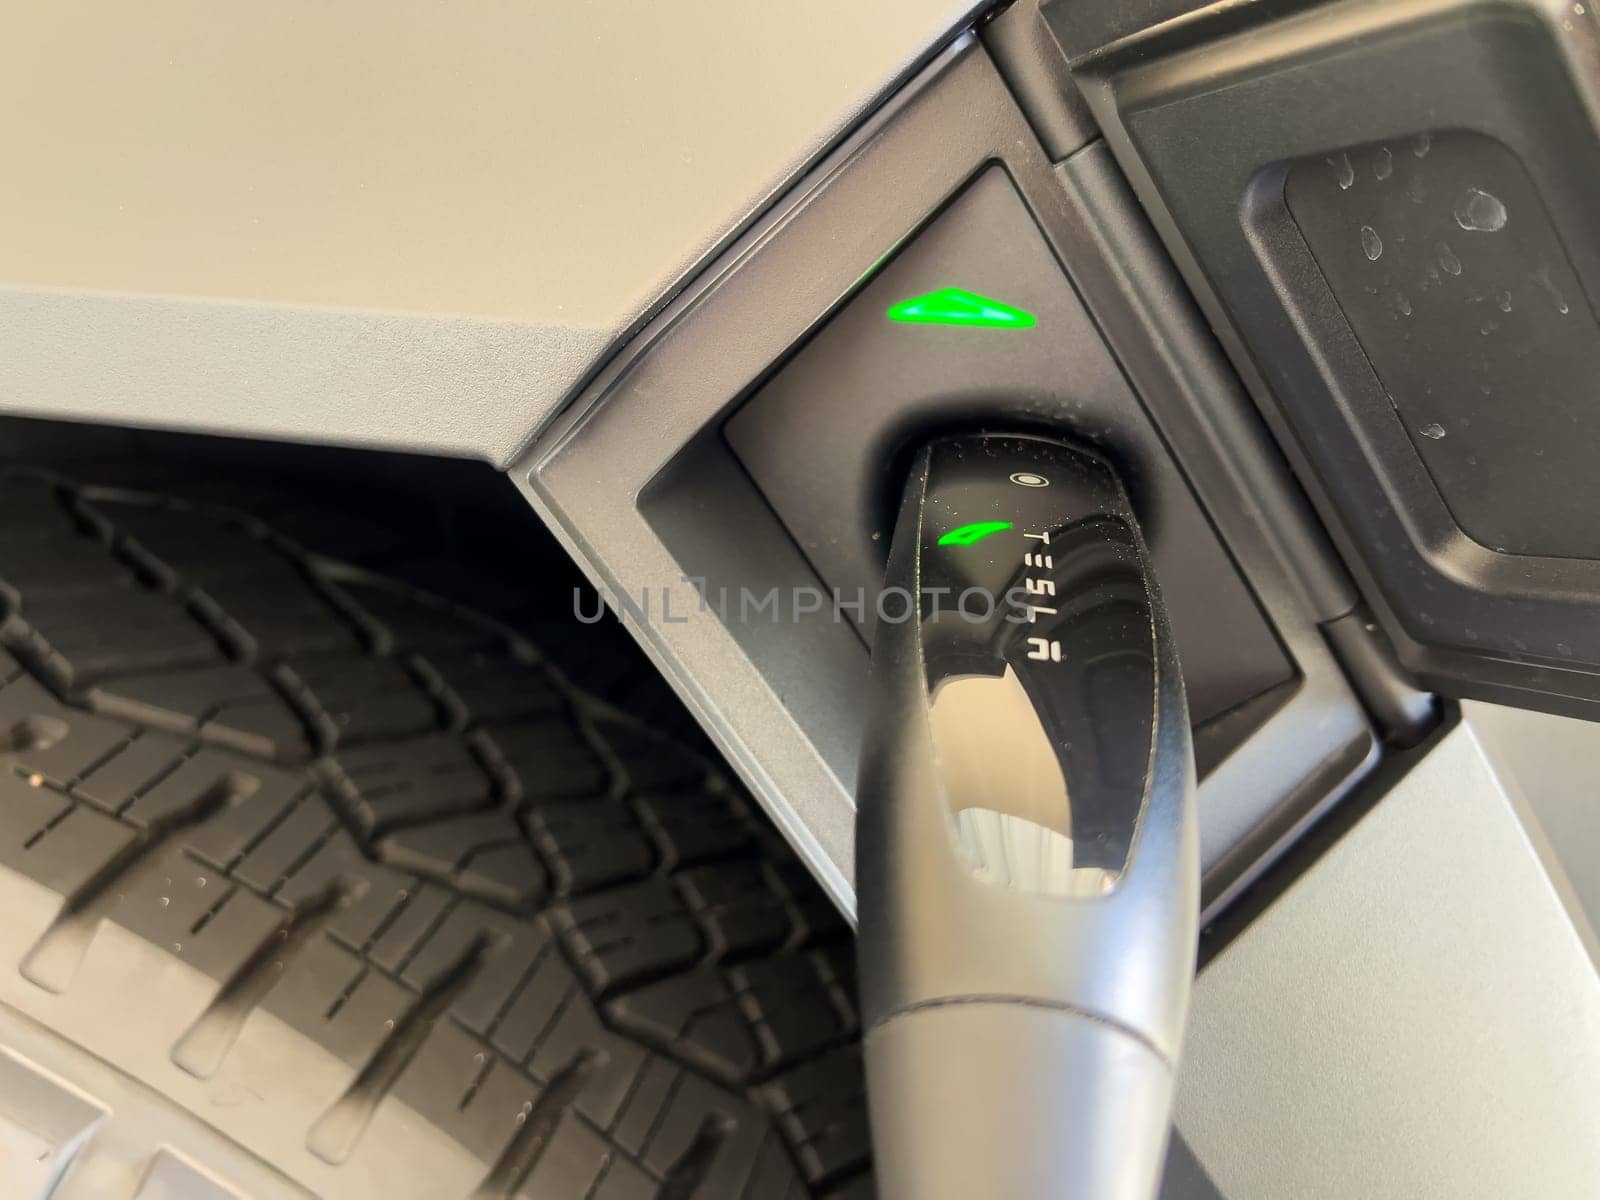 Charging a Tesla Cybertruck with a Home EV Charger in Suburban Garage by arinahabich